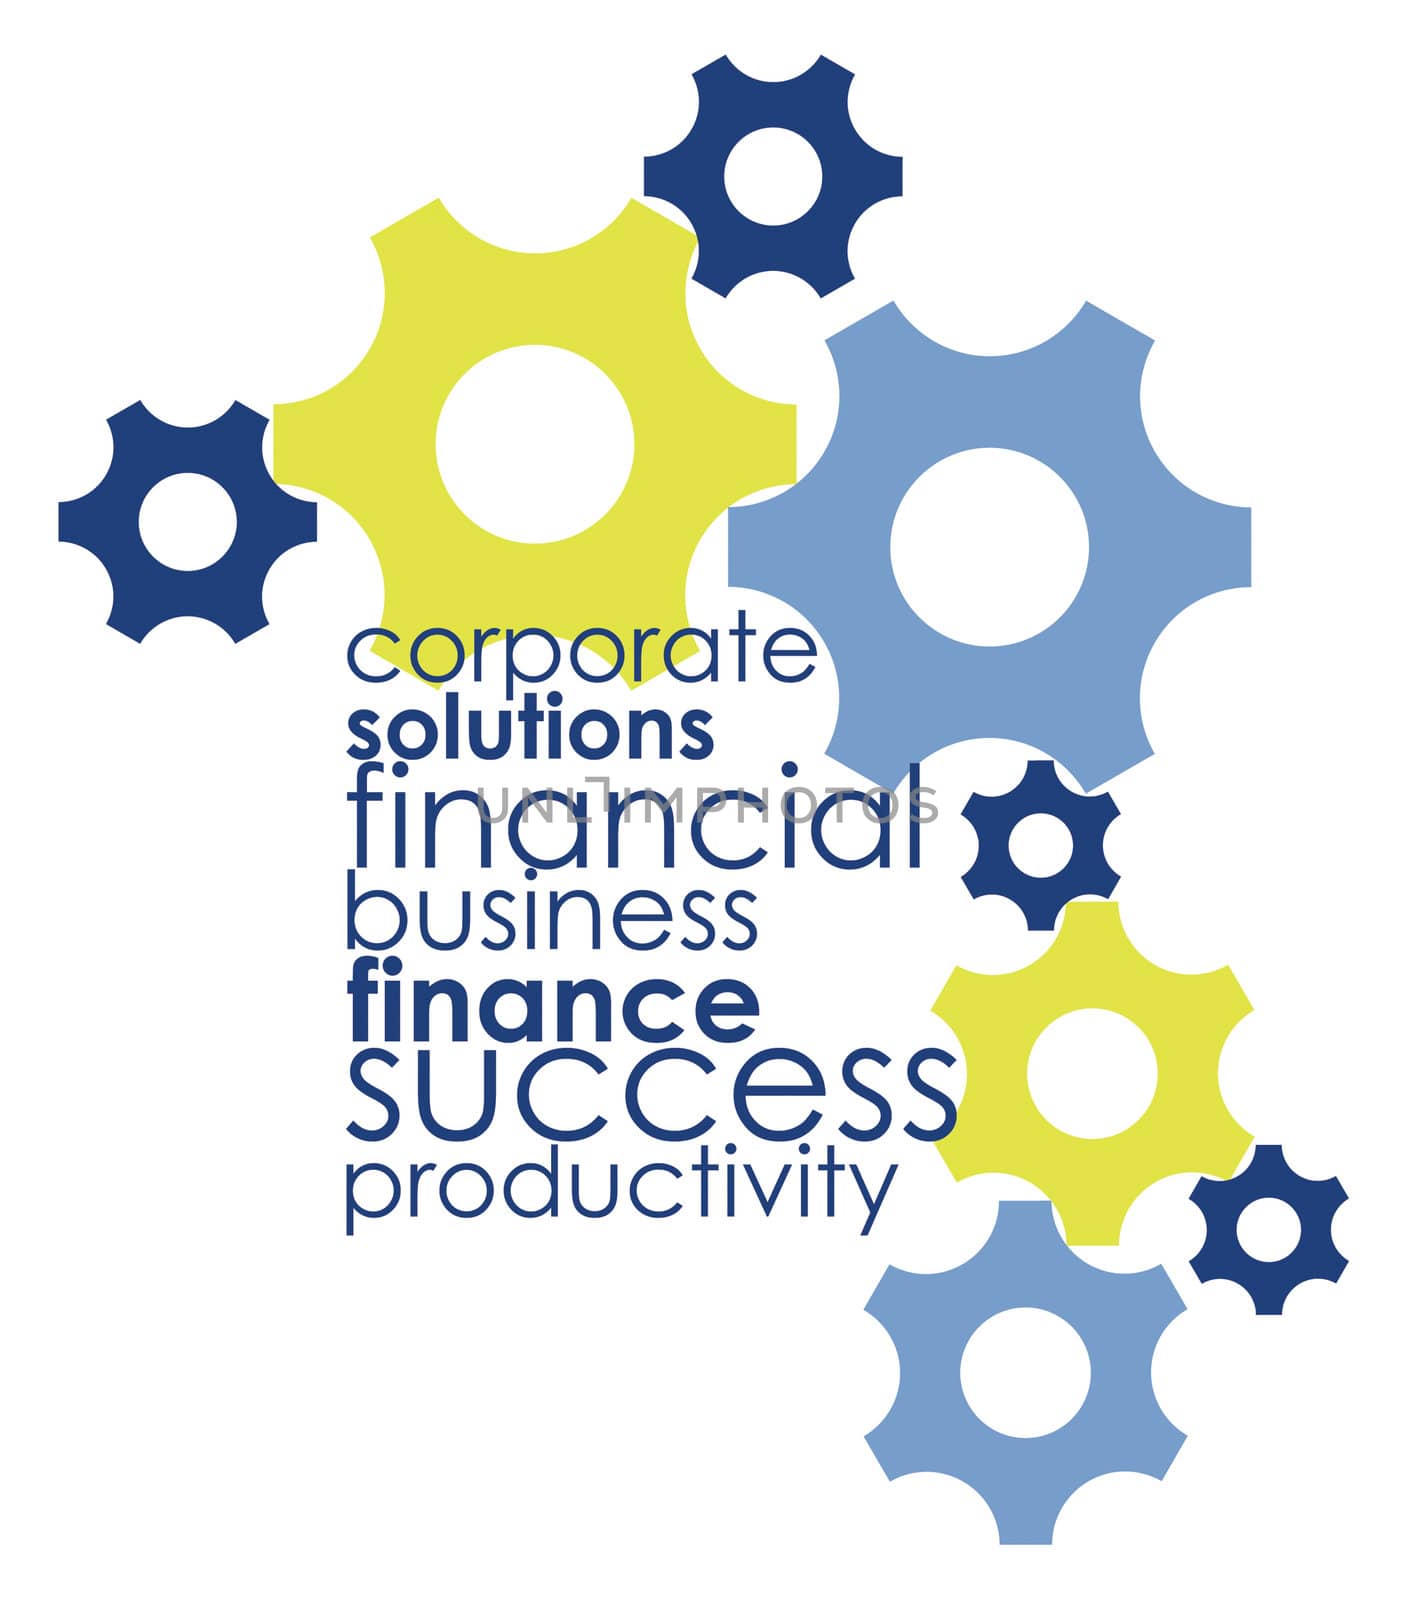 A portrait format business styled background with associated financial based text and words with symbolised cogs representing the wheels of industry. Set on an isolated white background.